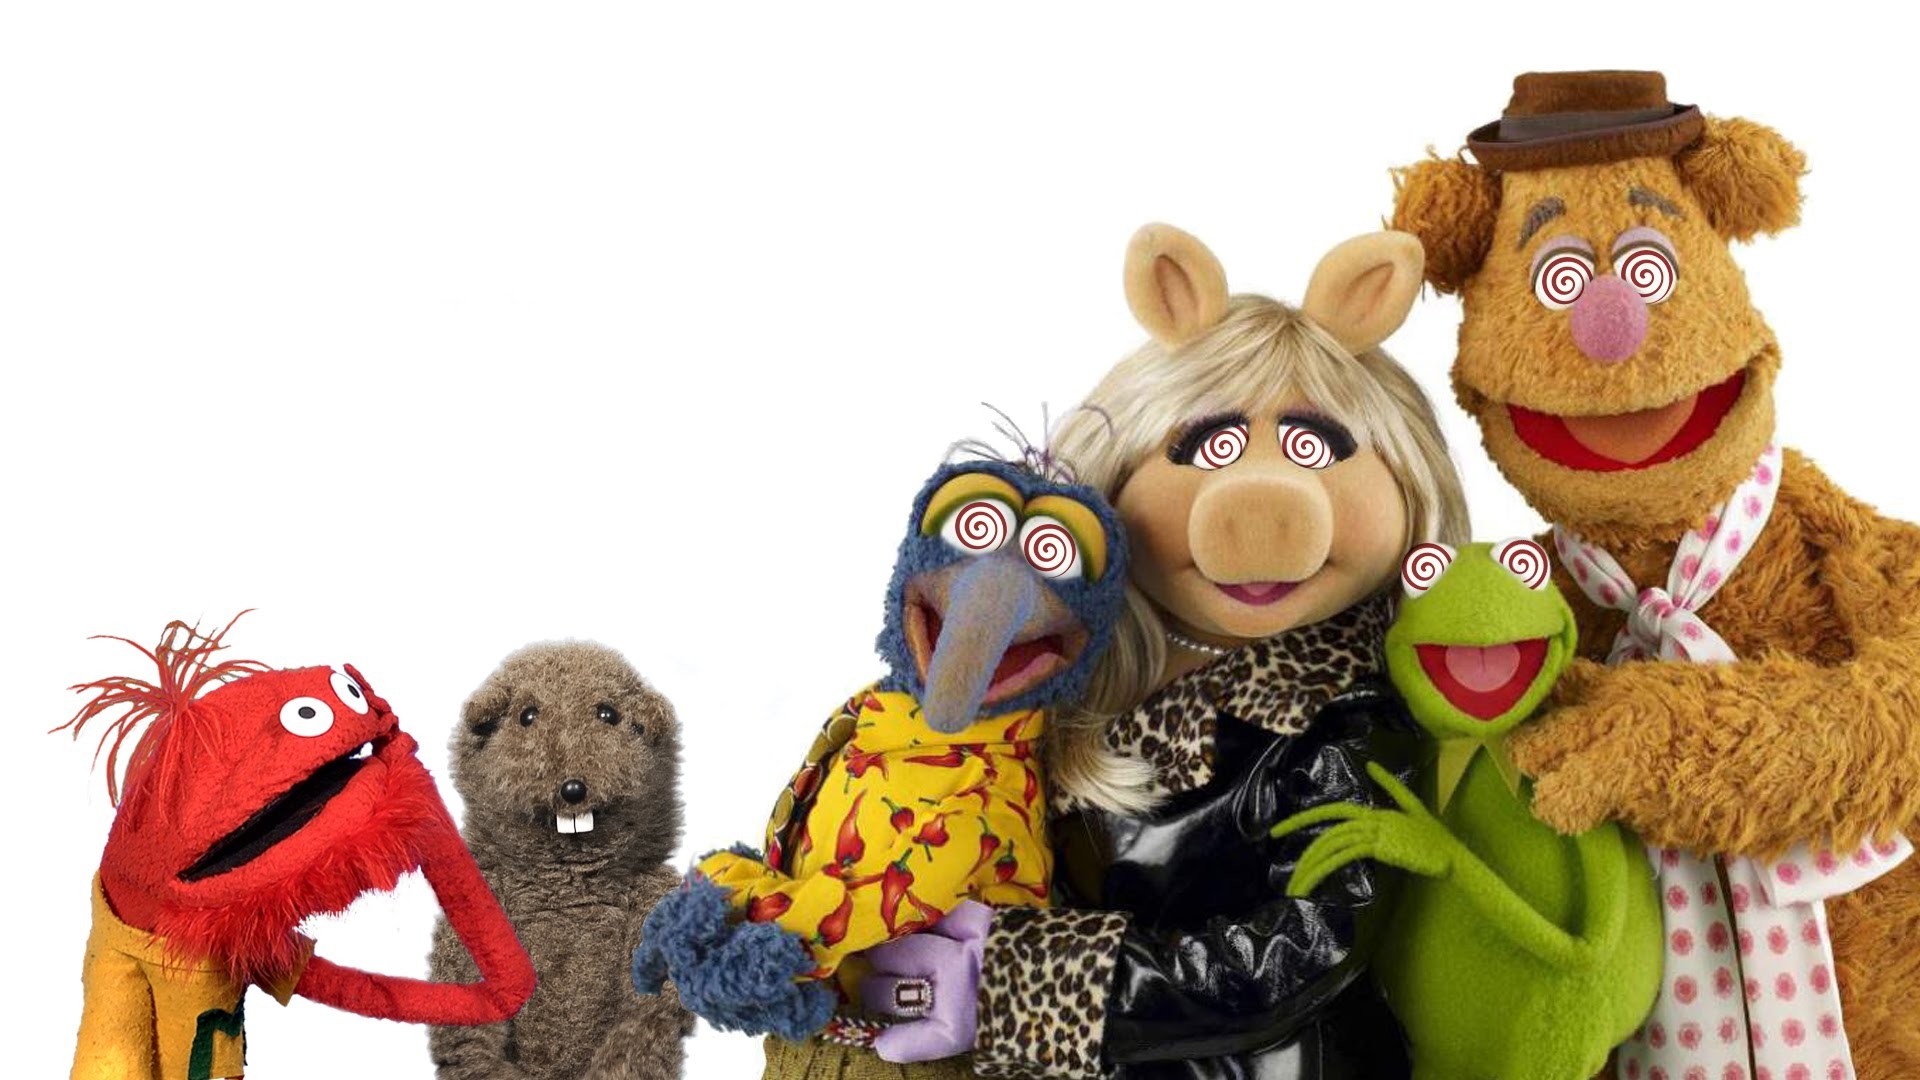 1920x1080 Nice Images Collection: The Muppets Desktop Wallpapers